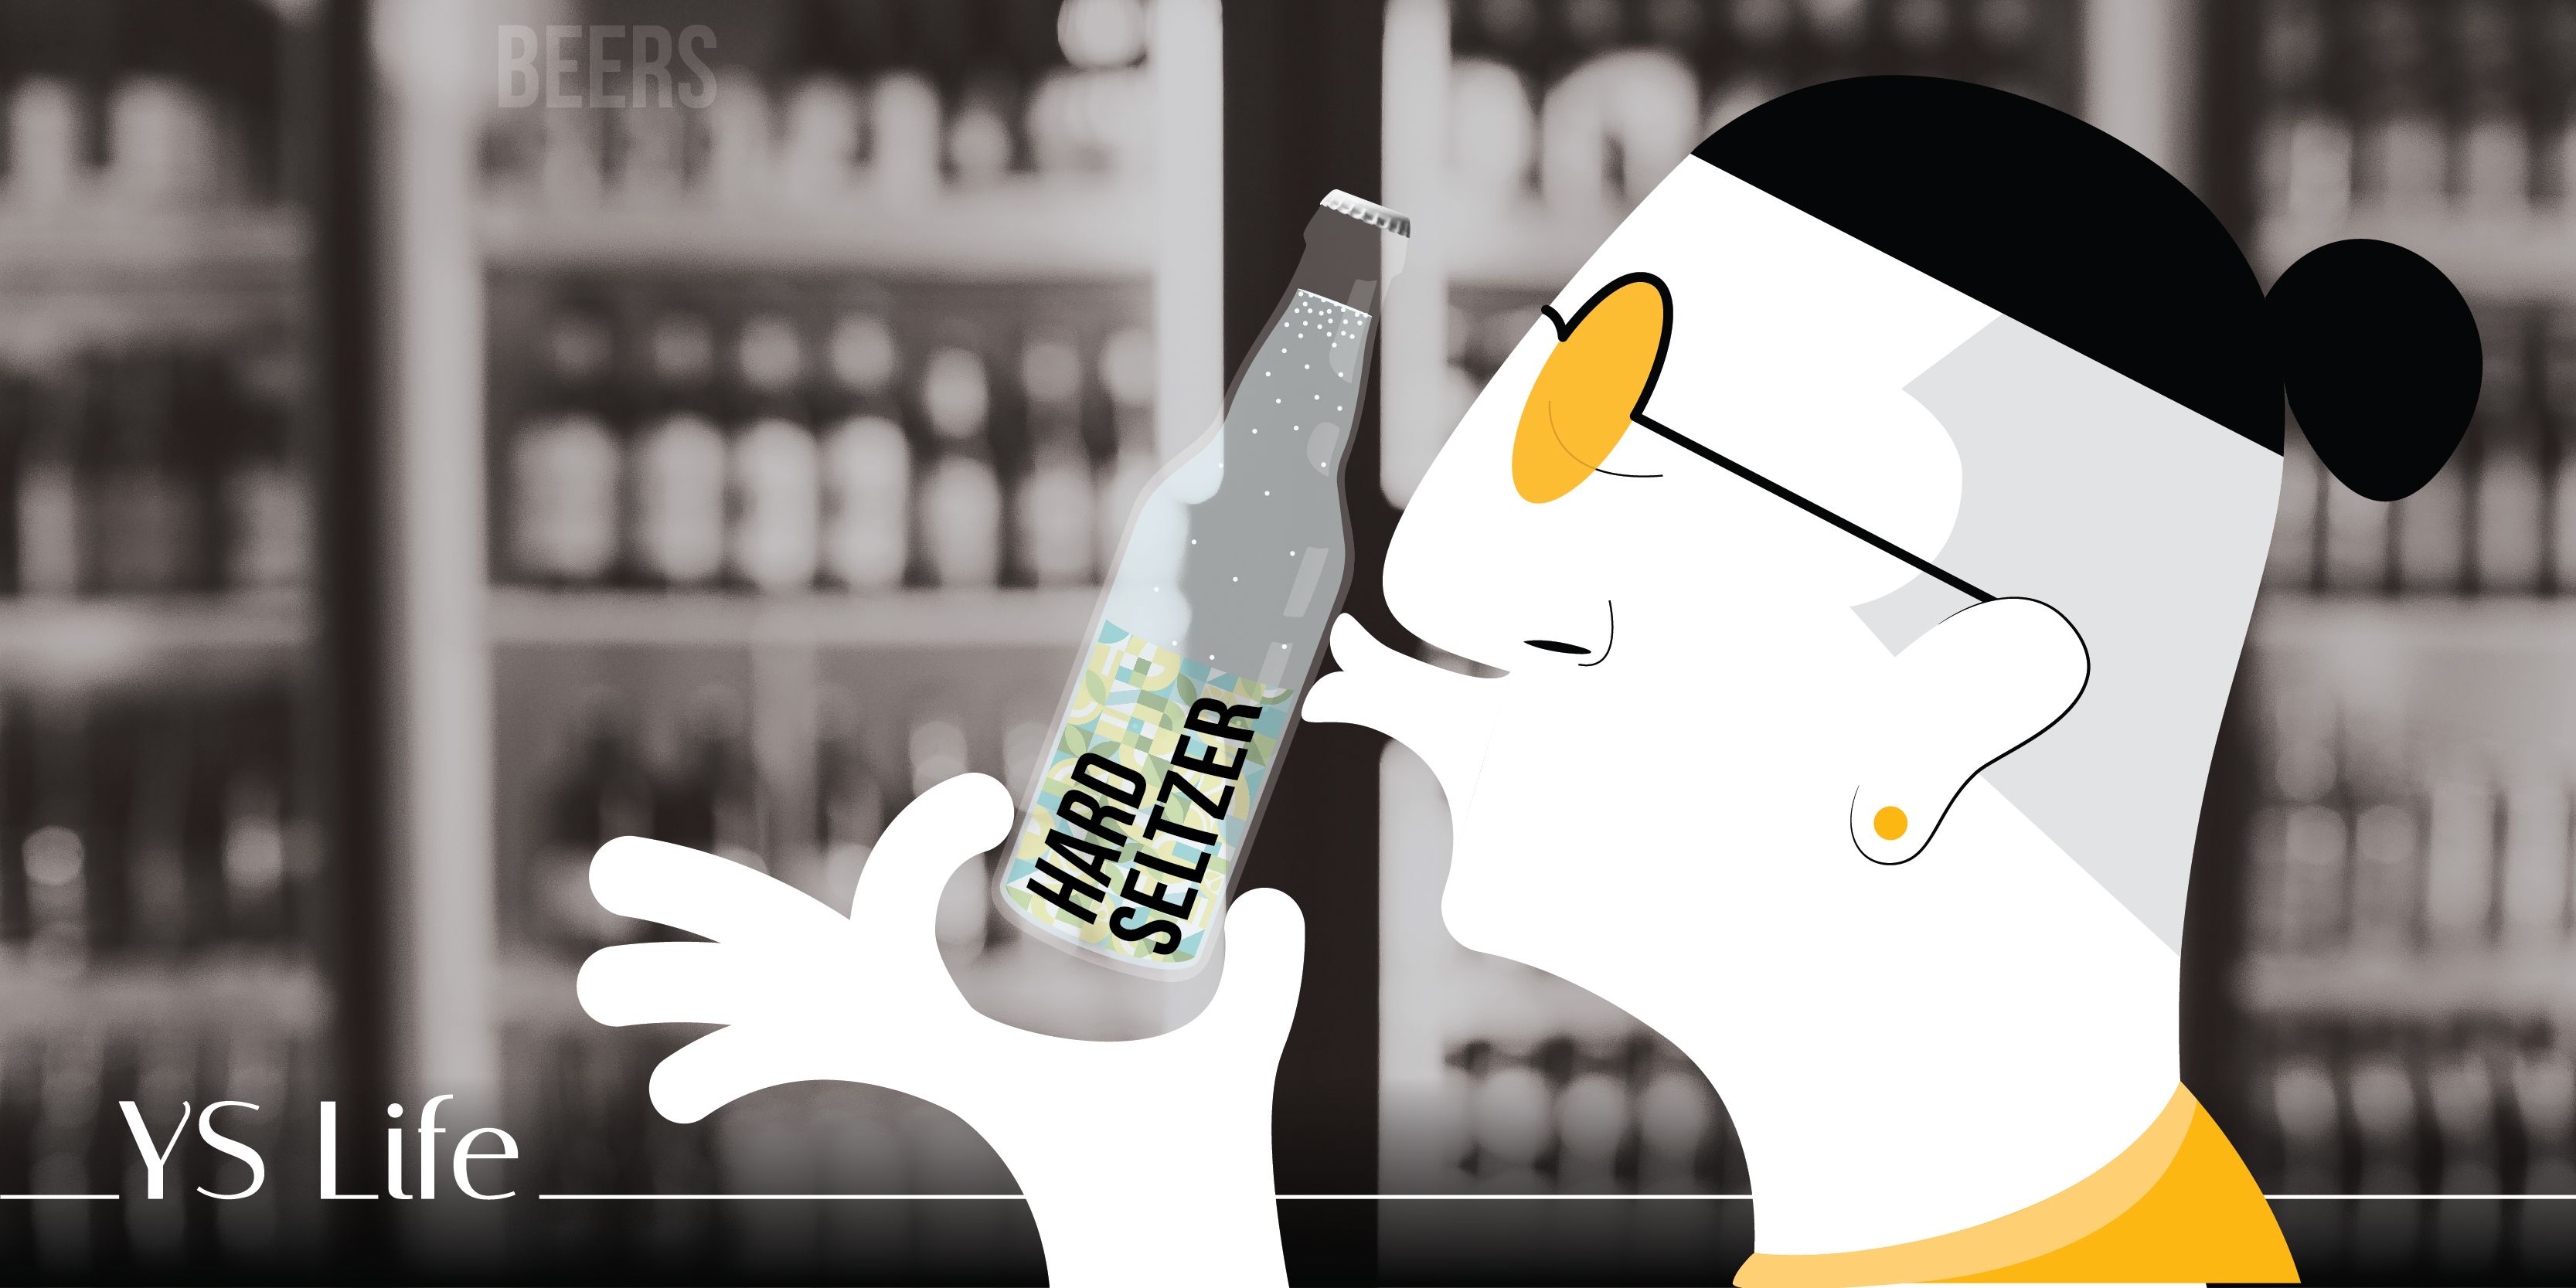 Seltzer: The new kid on the block competing with beer